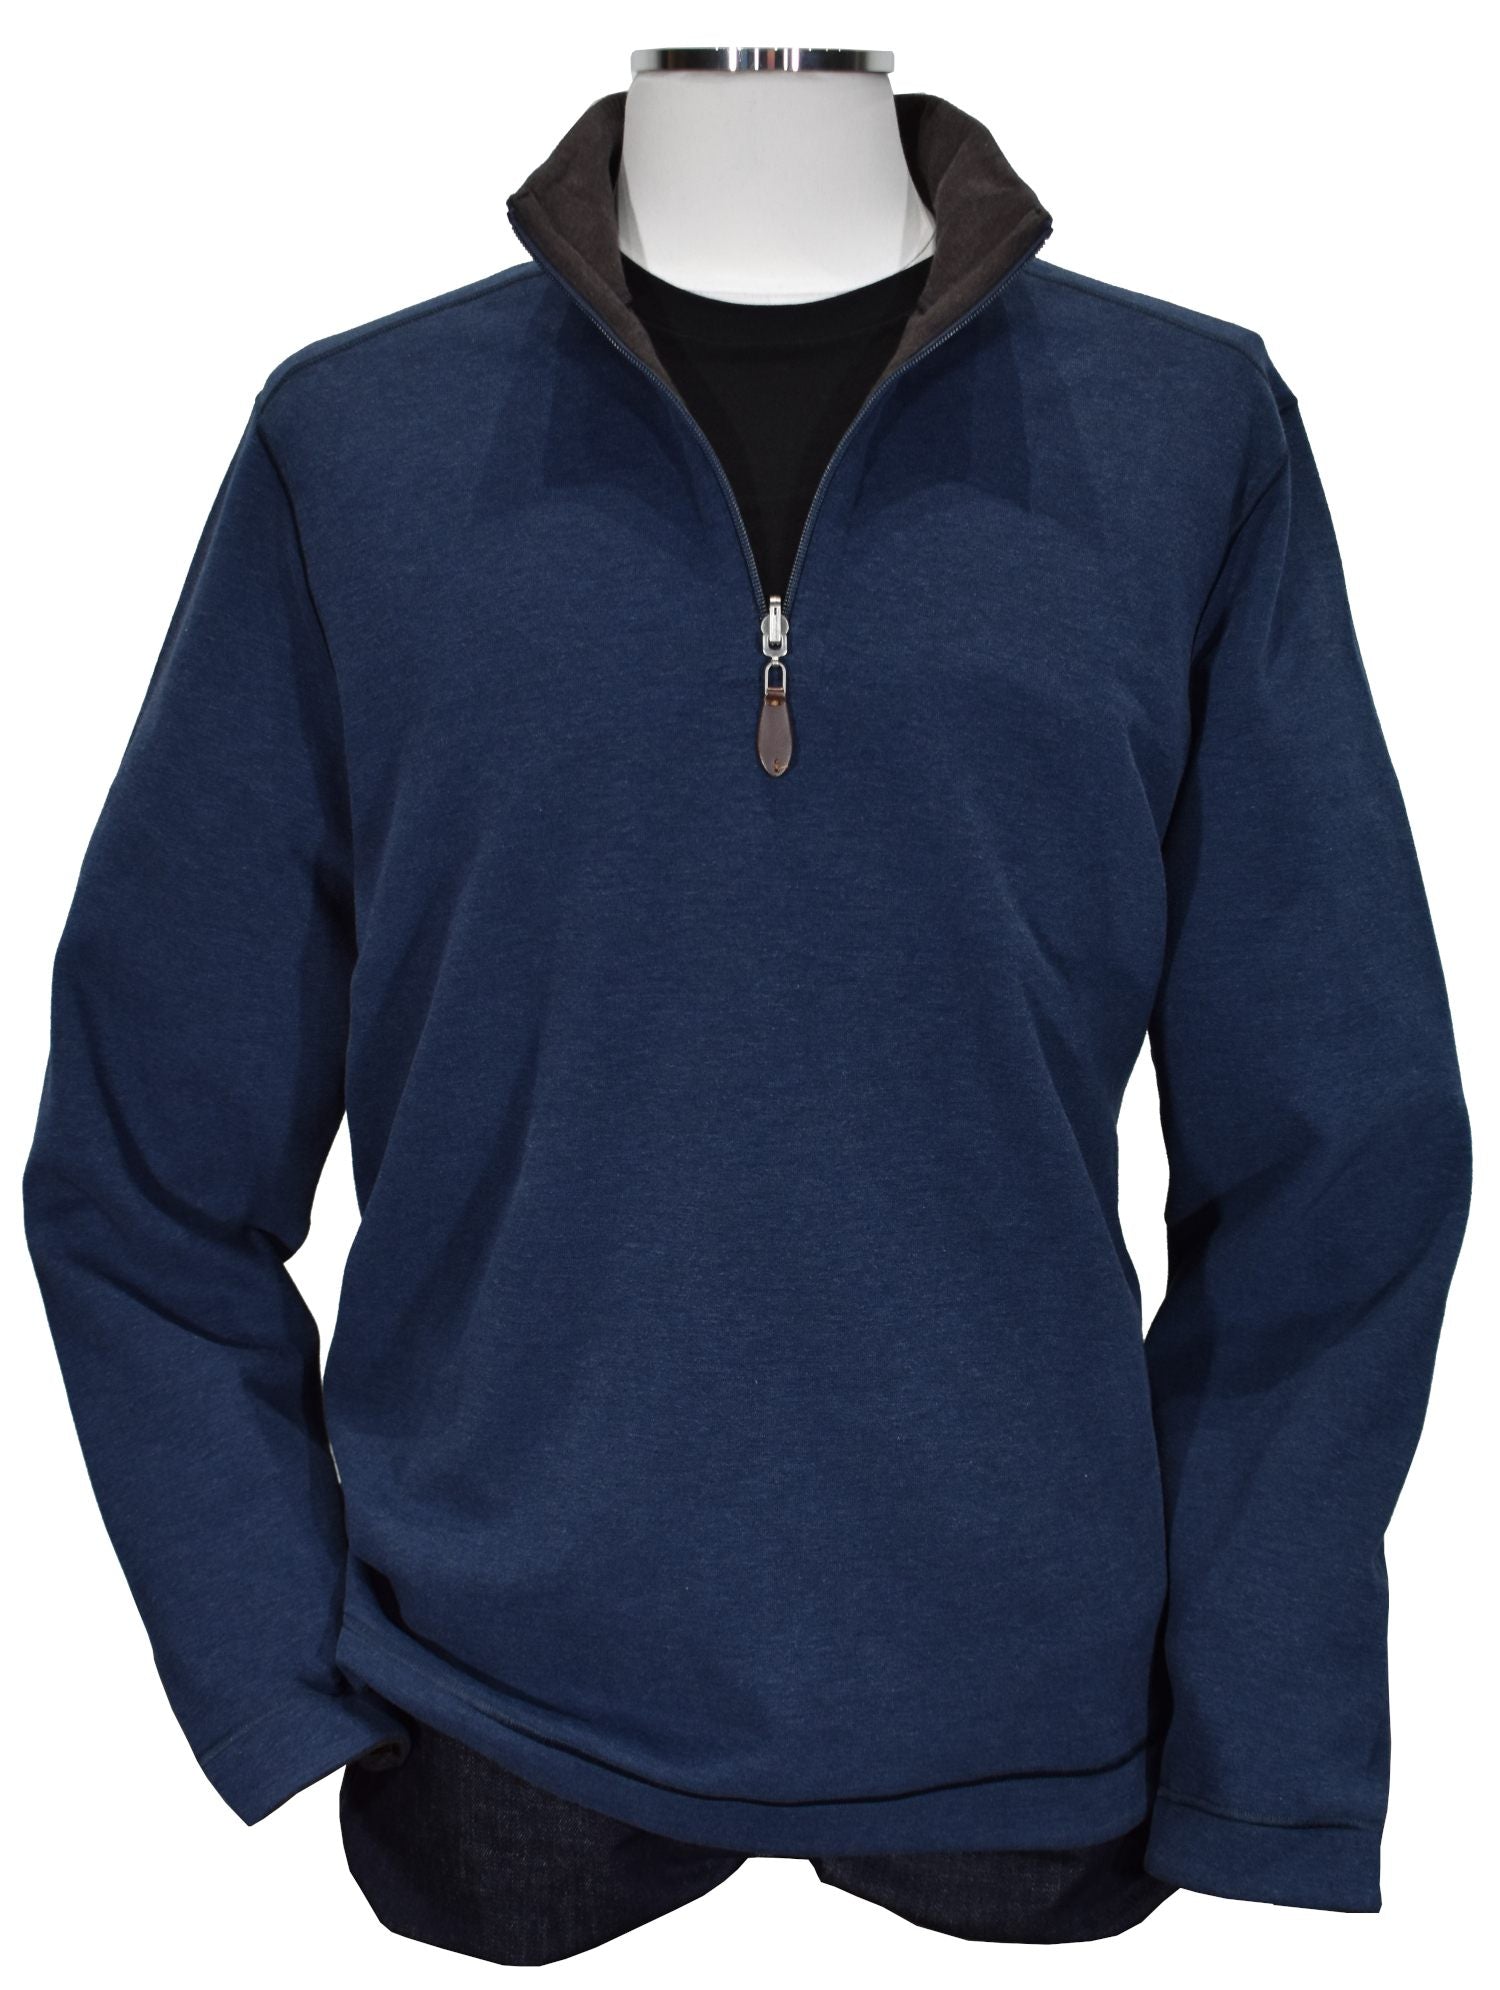 The ZN6270 Nico Reversible 1/4 Zip is an essential for your wardrobe. Reversible and lightweight, this classic quarter zip has a contemporary fit, with raised welt detailing along the seams and an open sleeve and bottom for an effortlessly stylish look. Soft and breathable, it can be worn alone or layered for any occasion.  Classic shaped fit.